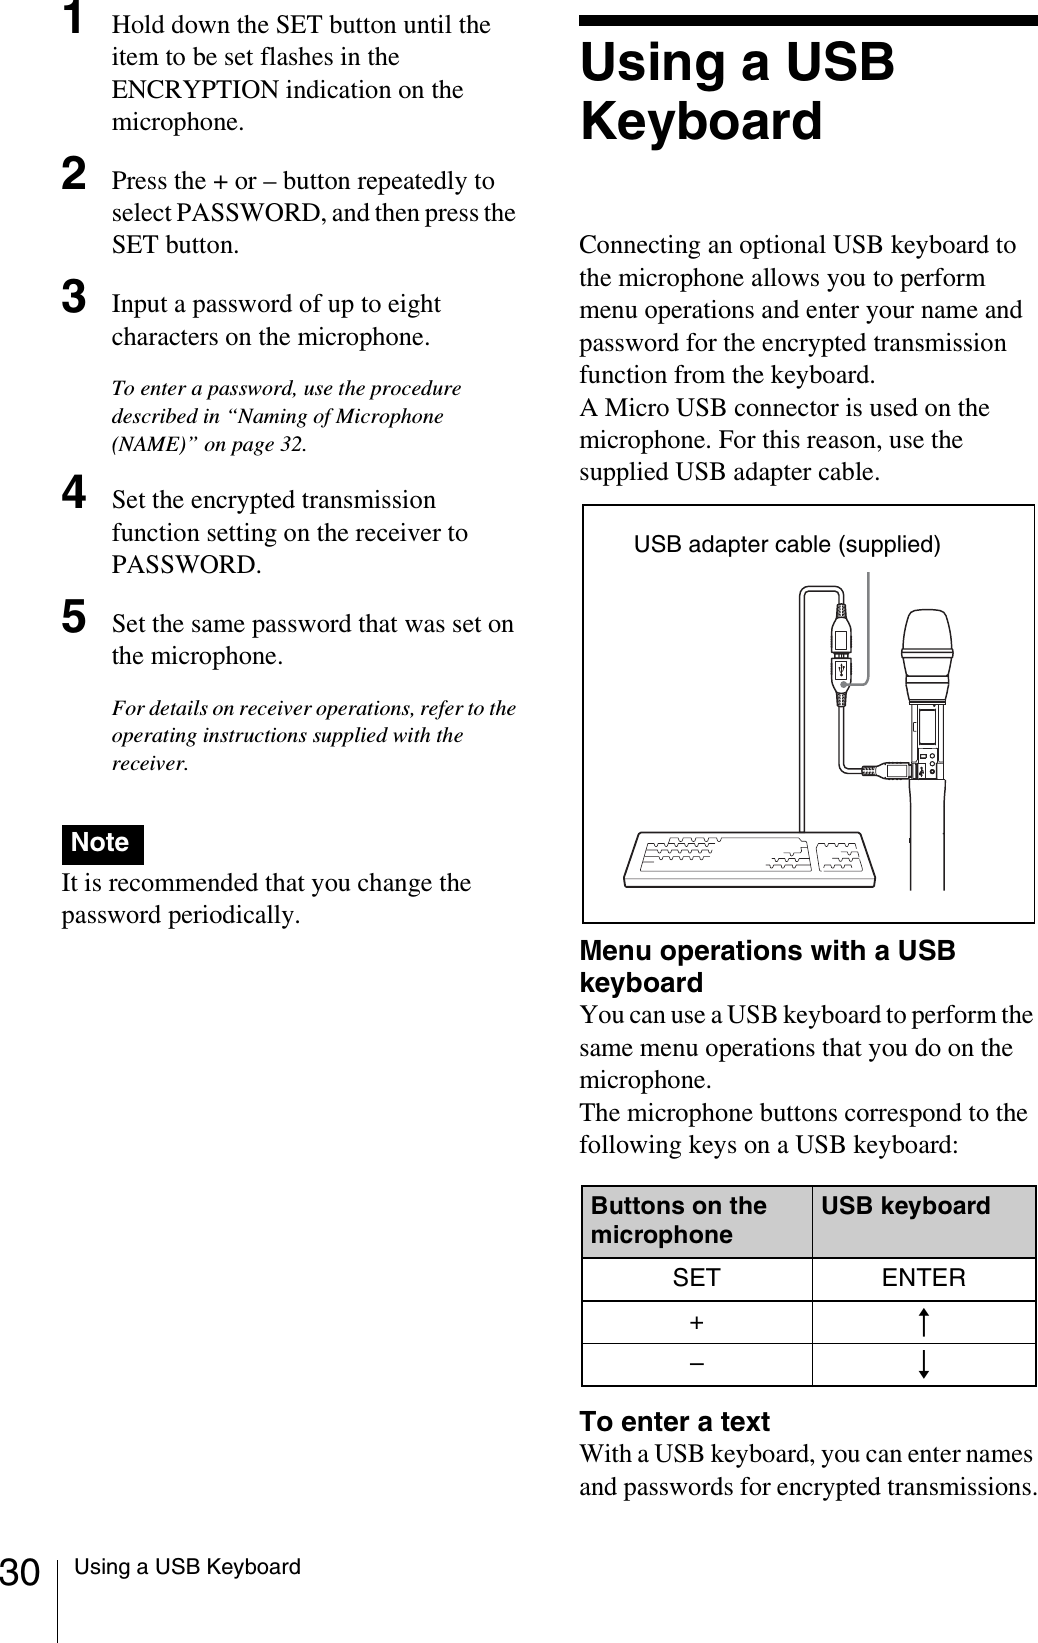 30 Using a USB Keyboard1Hold down the SET button until the item to be set flashes in the ENCRYPTION indication on the microphone.2Press the + or – button repeatedly to select PASSWORD, and then press the SET button.3Input a password of up to eight characters on the microphone.To enter a password, use the procedure described in “Naming of Microphone (NAME)” on page 32.4Set the encrypted transmission function setting on the receiver to PASSWORD.5Set the same password that was set on the microphone.For details on receiver operations, refer to the operating instructions supplied with the receiver.It is recommended that you change the password periodically.Using a USB KeyboardConnecting an optional USB keyboard to the microphone allows you to perform menu operations and enter your name and password for the encrypted transmission function from the keyboard.A Micro USB connector is used on the microphone. For this reason, use the supplied USB adapter cable.Menu operations with a USB keyboardYou can use a USB keyboard to perform the same menu operations that you do on the microphone.The microphone buttons correspond to the following keys on a USB keyboard:To enter a textWith a USB keyboard, you can enter names and passwords for encrypted transmissions.NoteButtons on the microphoneUSB keyboardSET ENTER+R–rUSB adapter cable (supplied)